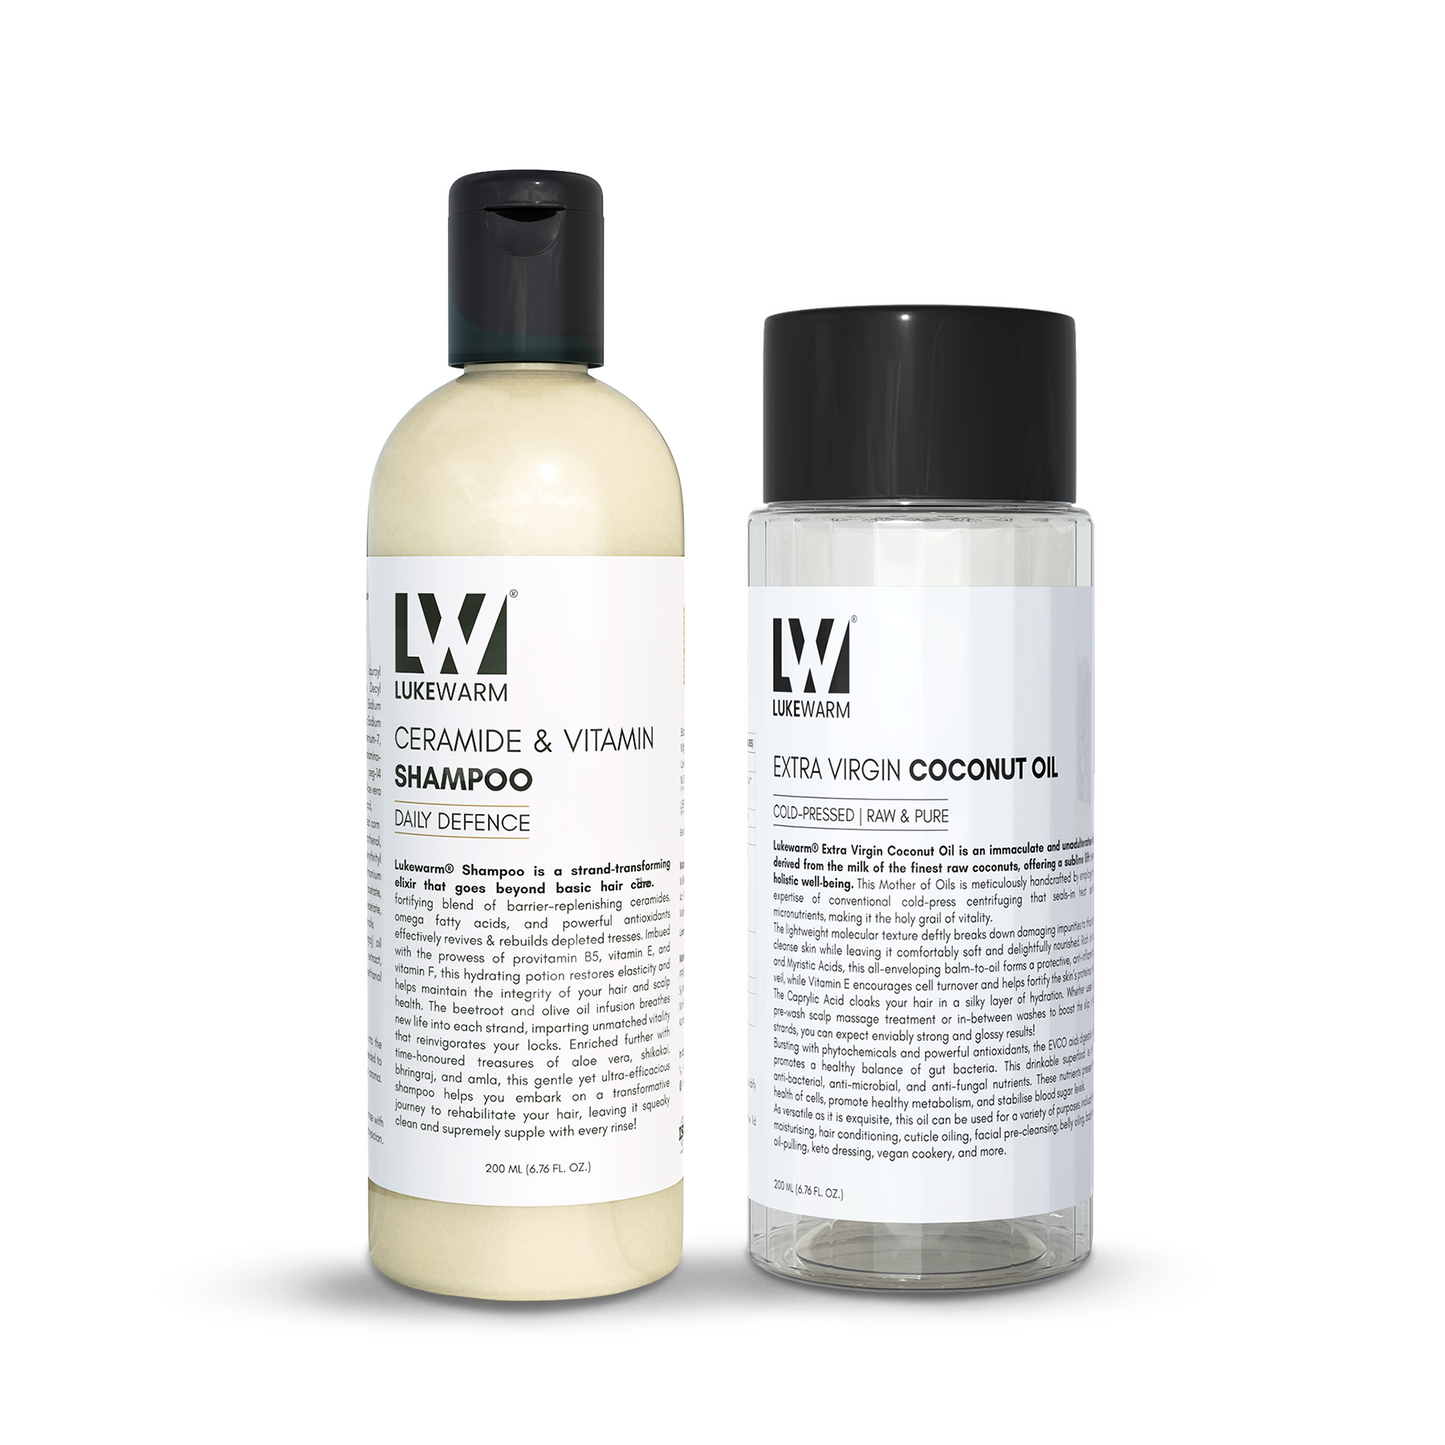 Lukewarm Shampoo & Extra Virgin Coconut Oil : The Ultimate Hair & Wellness Duo From Root to Toe